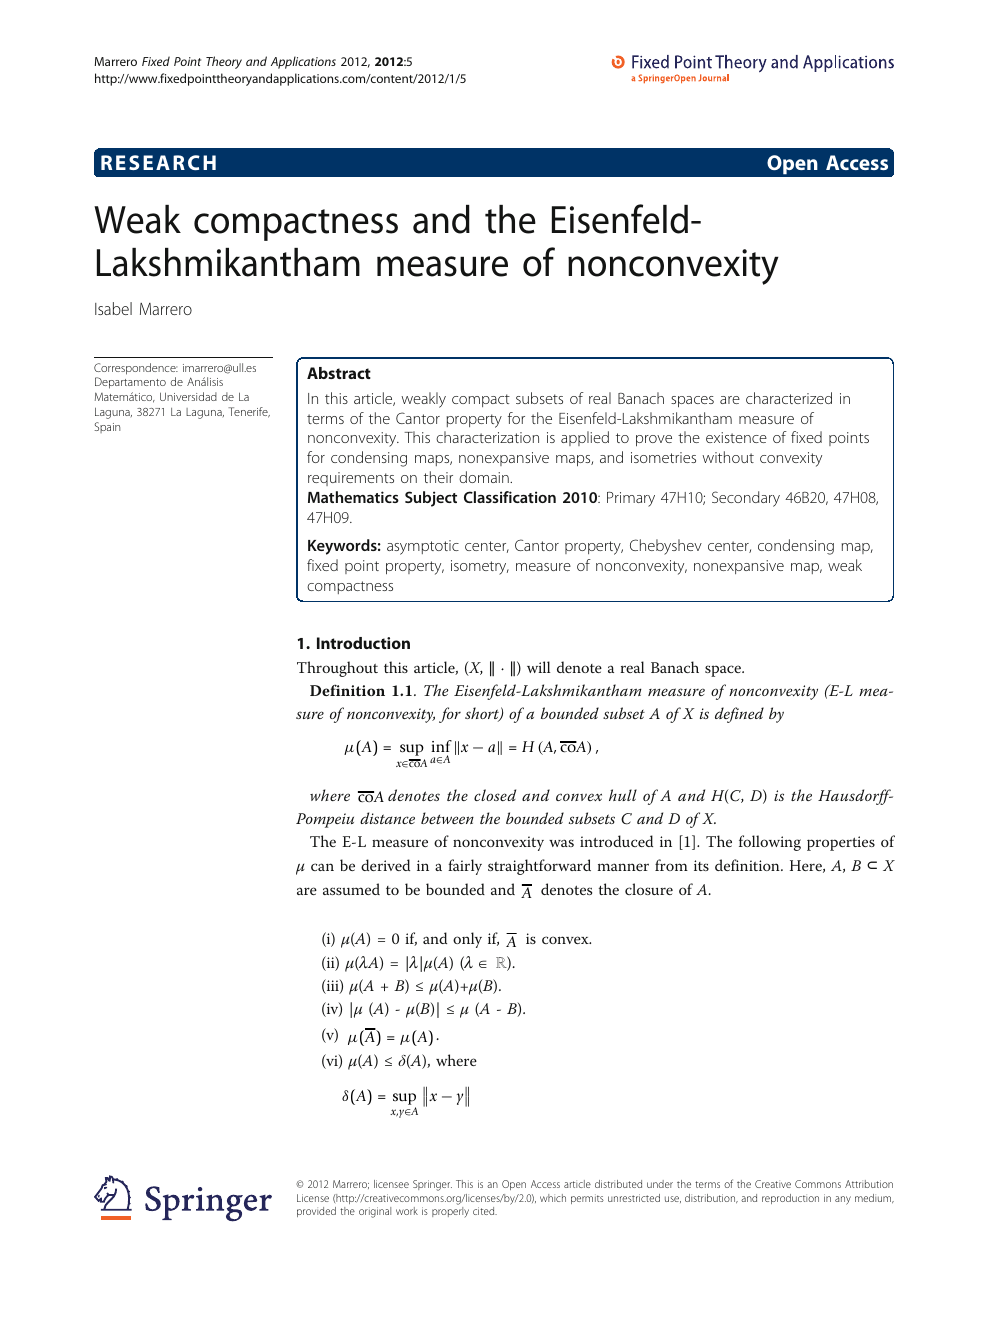 Weak Compactness And The Eisenfeld Lakshmikantham Measure Of Nonconvexity Topic Of Research Paper In Mathematics Download Scholarly Article Pdf And Read For Free On Cyberleninka Open Science Hub